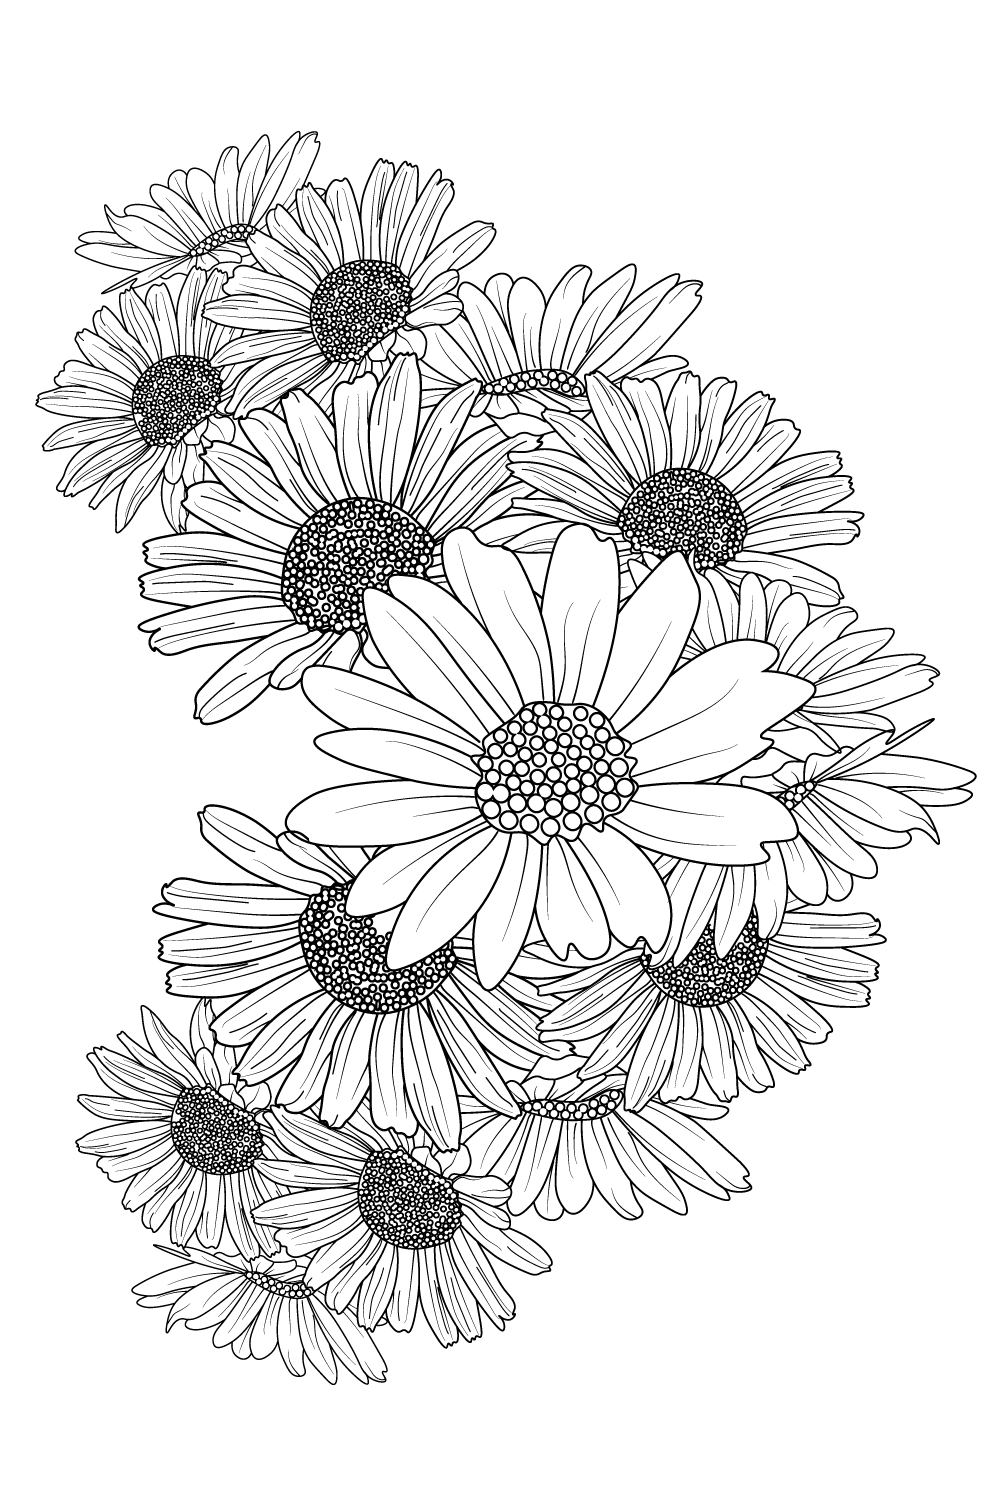 Daisy line drawing tattoo daisy flower drawing tattoo daisy line art, pinterest preview image.